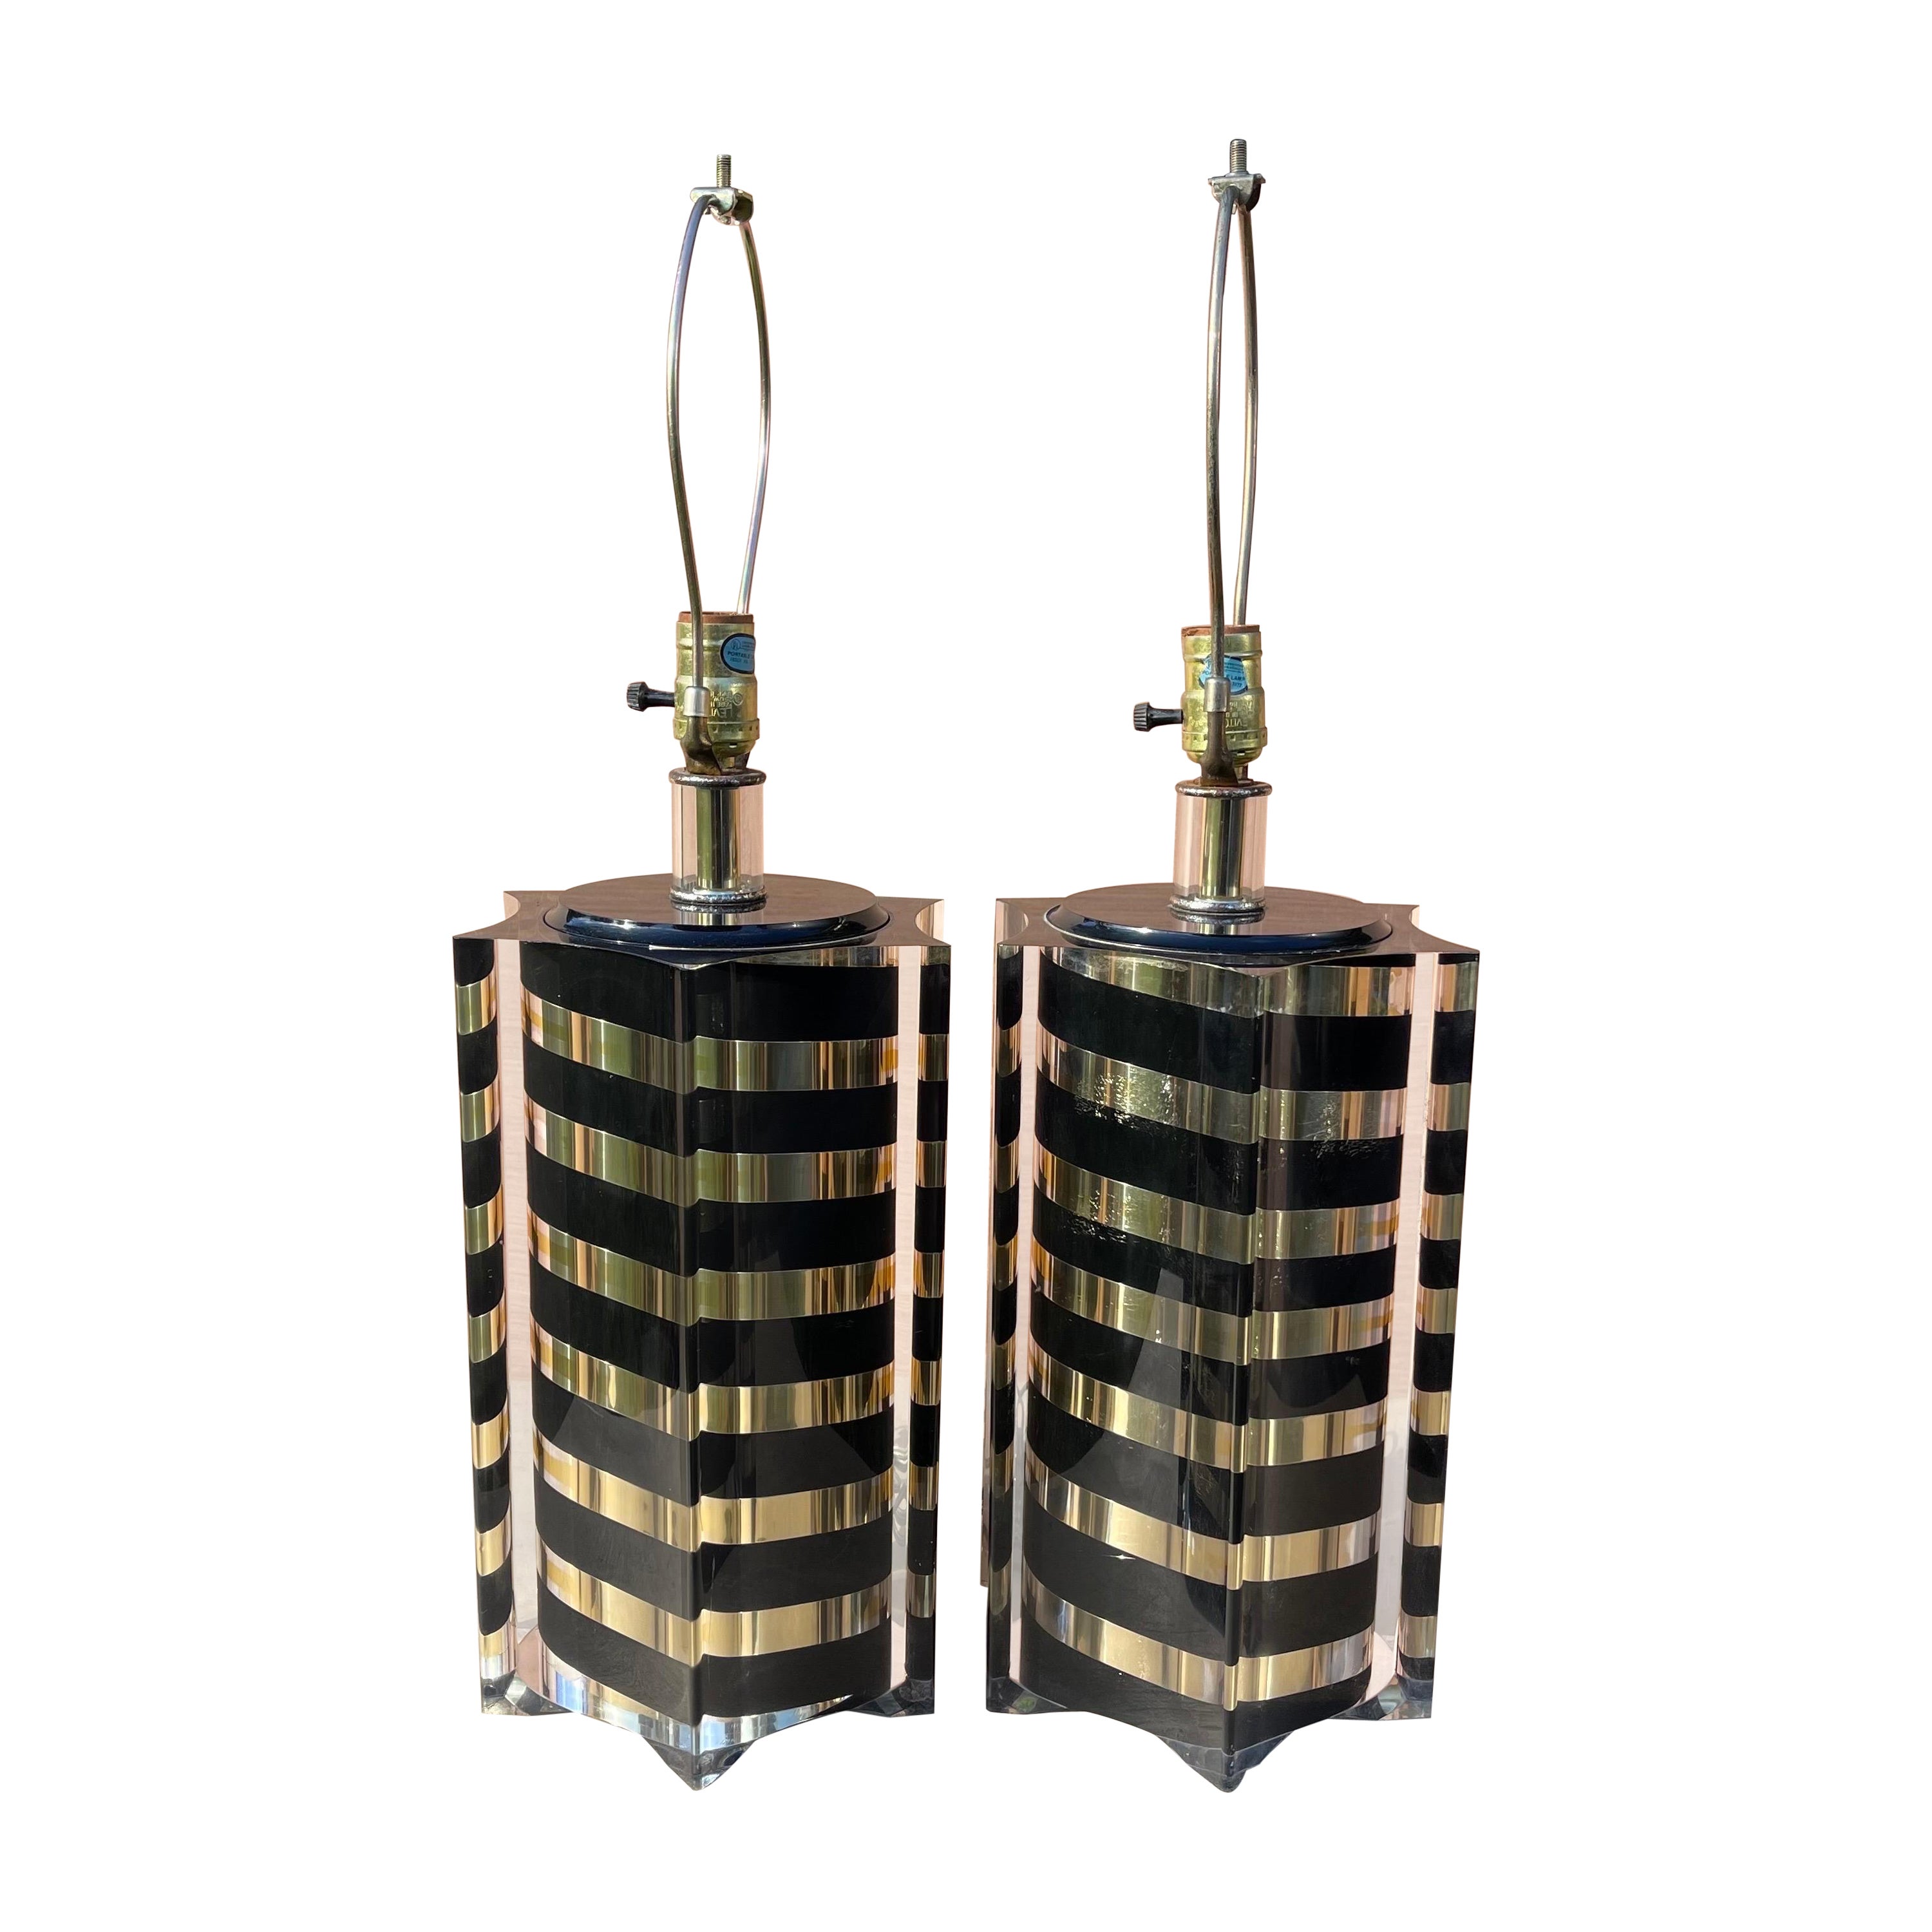 Postmodern Black & Gold Striped Lucite Lamps, Smart Italia Roma, 1980s - a Pair For Sale